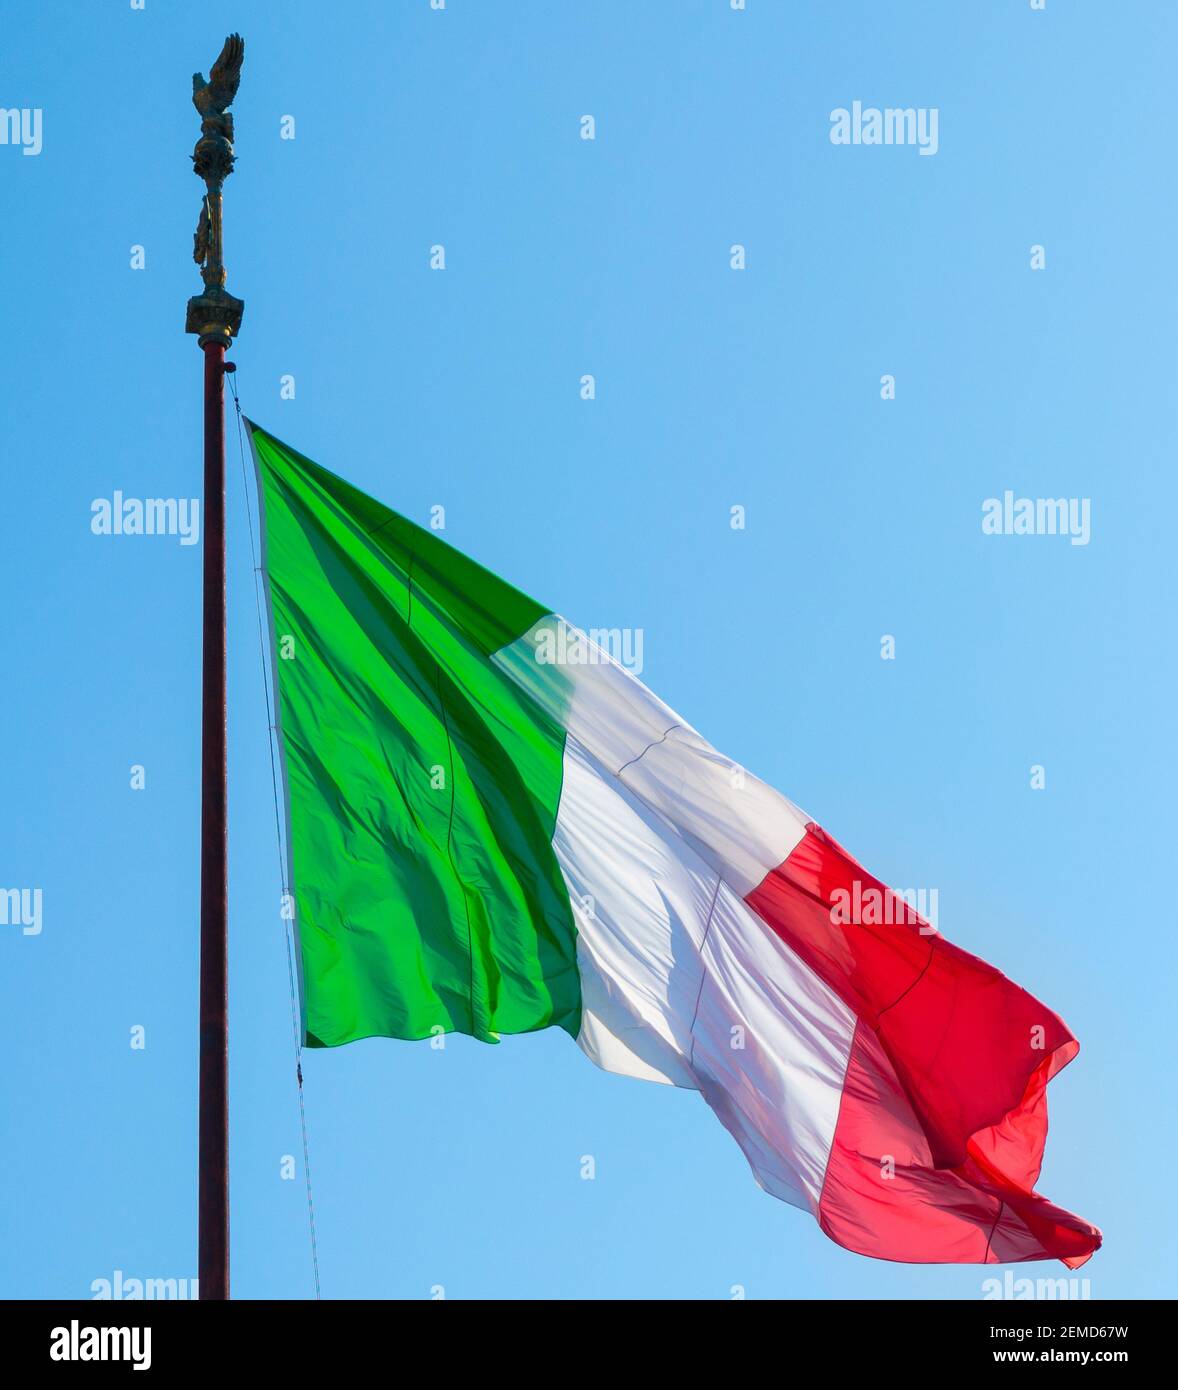 Rome, Italy - Oct 03, 2018: Real state flag of the Republic of Italy Stock Photo